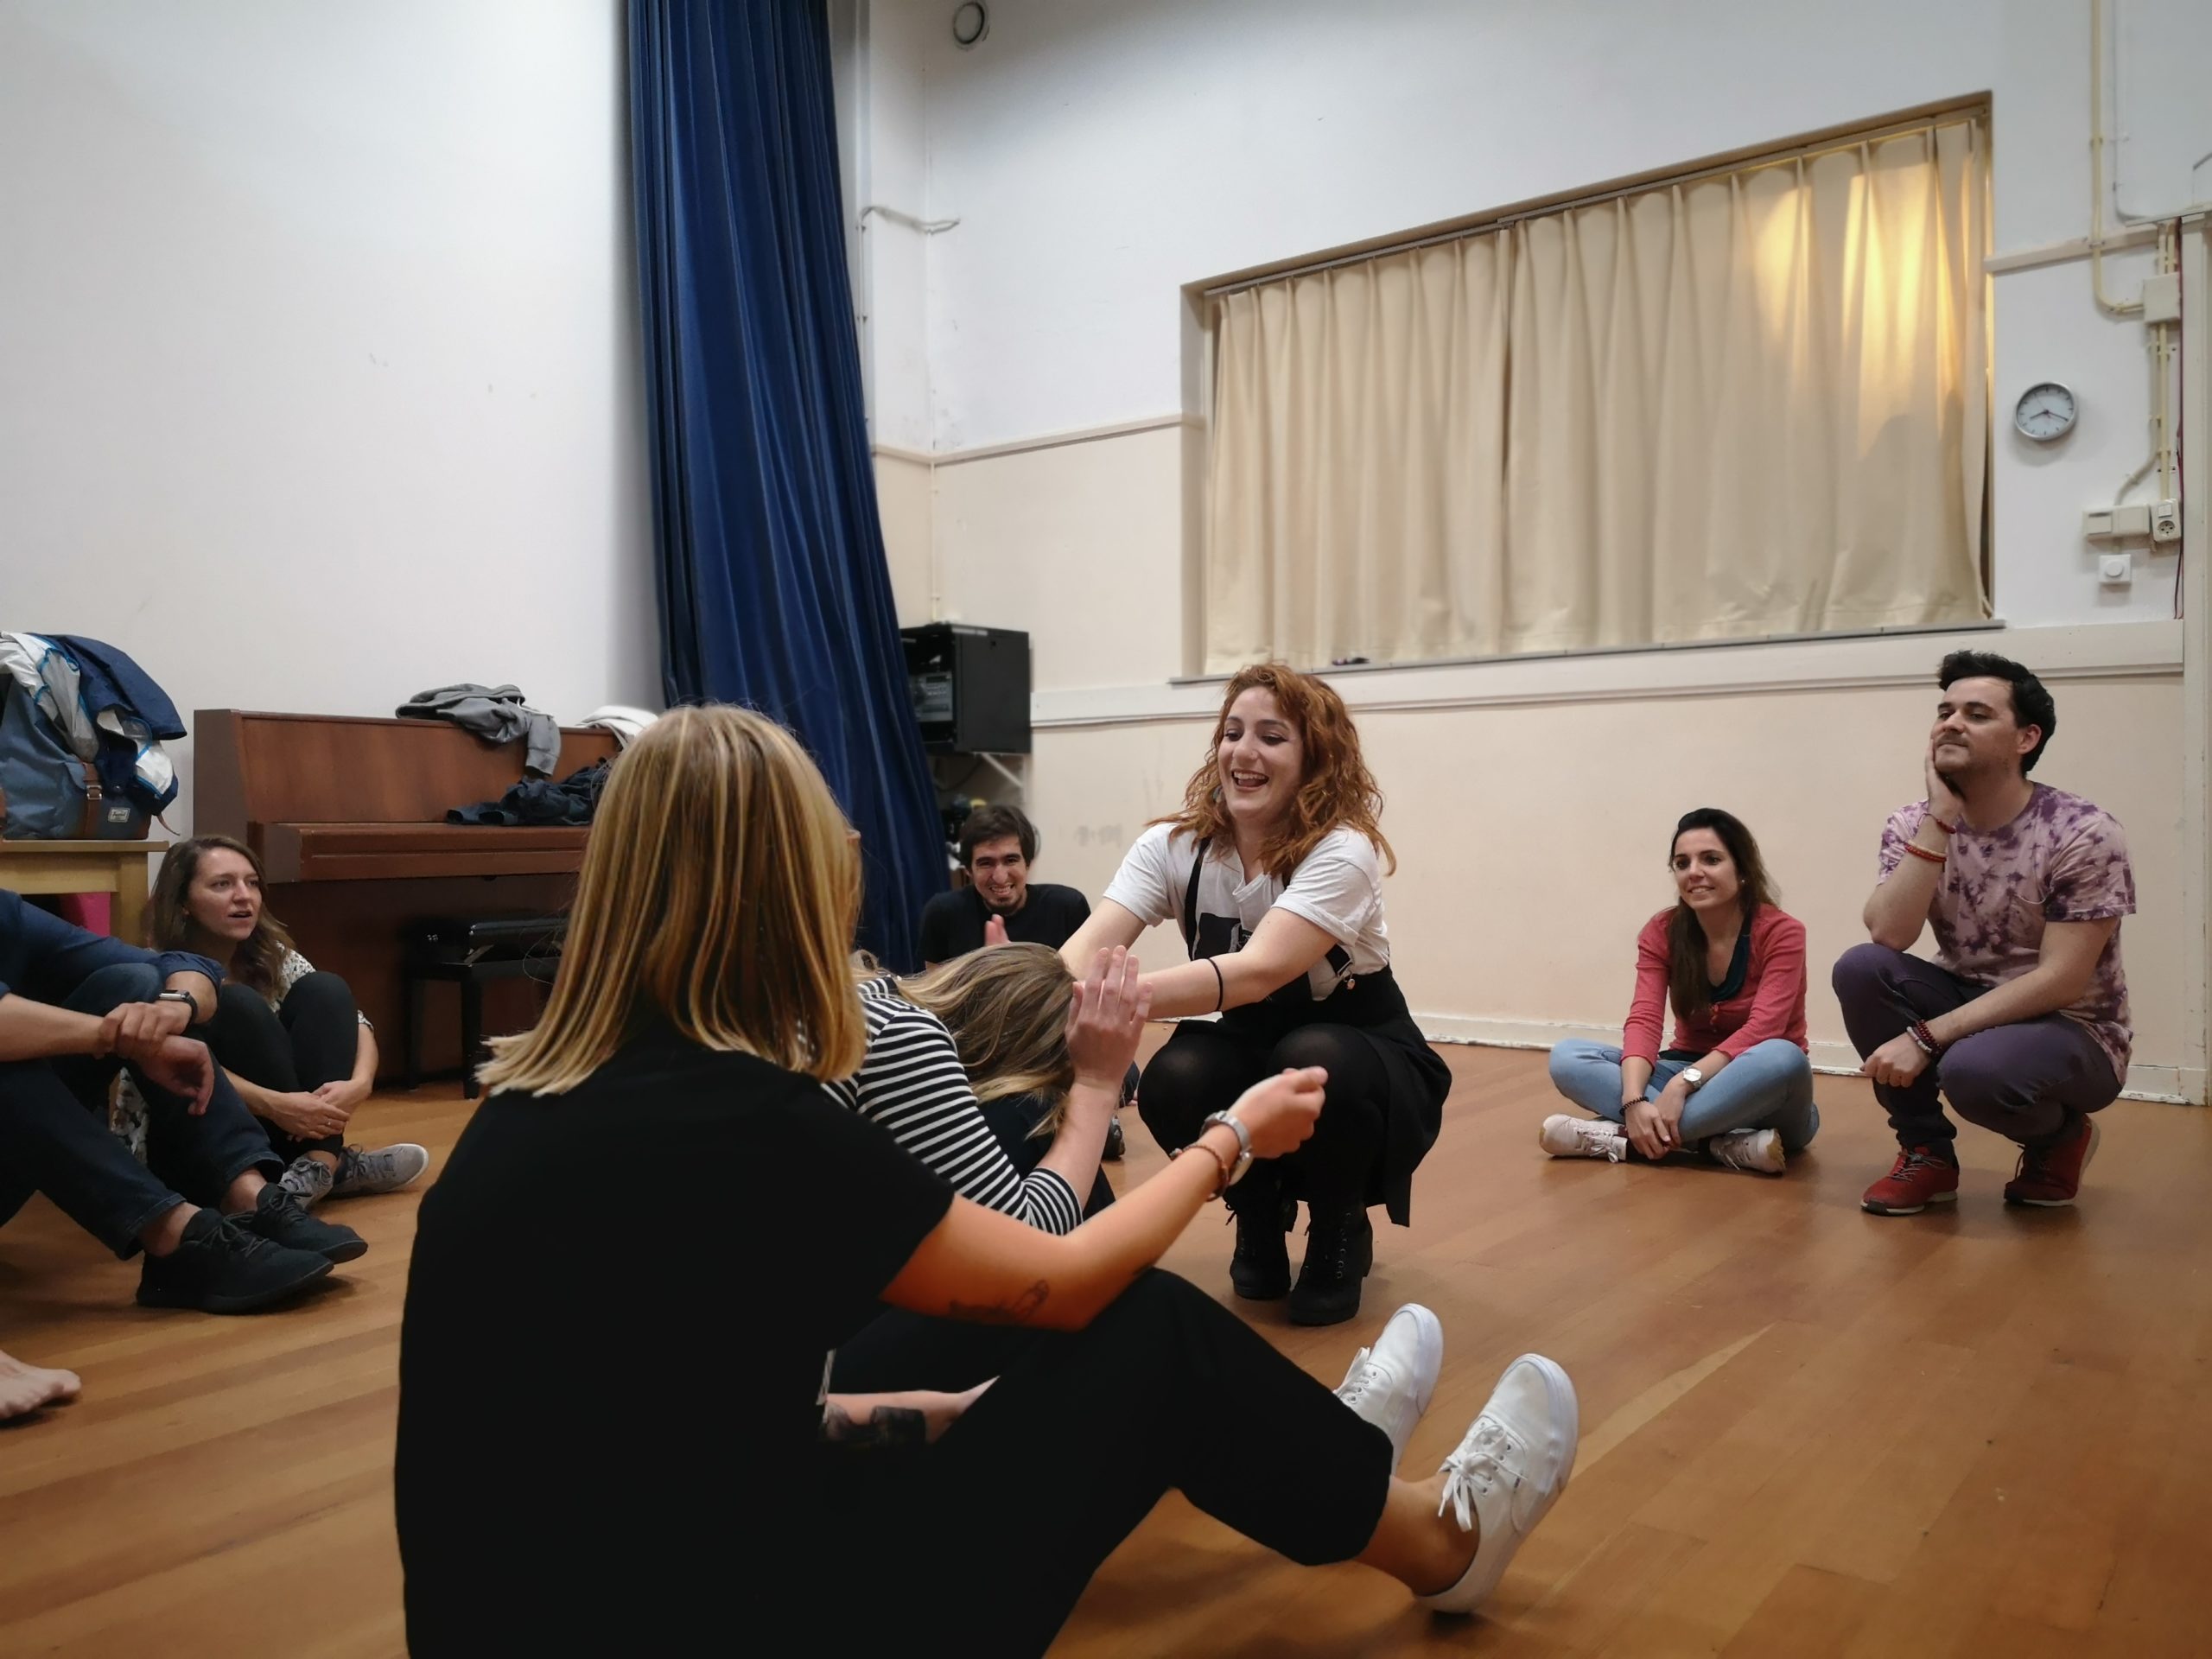 From the improv and physical class. A group sits in a circle. Three women are in the middle, two sitting, one kneeling and laughing, reaching her hands to one of the others.